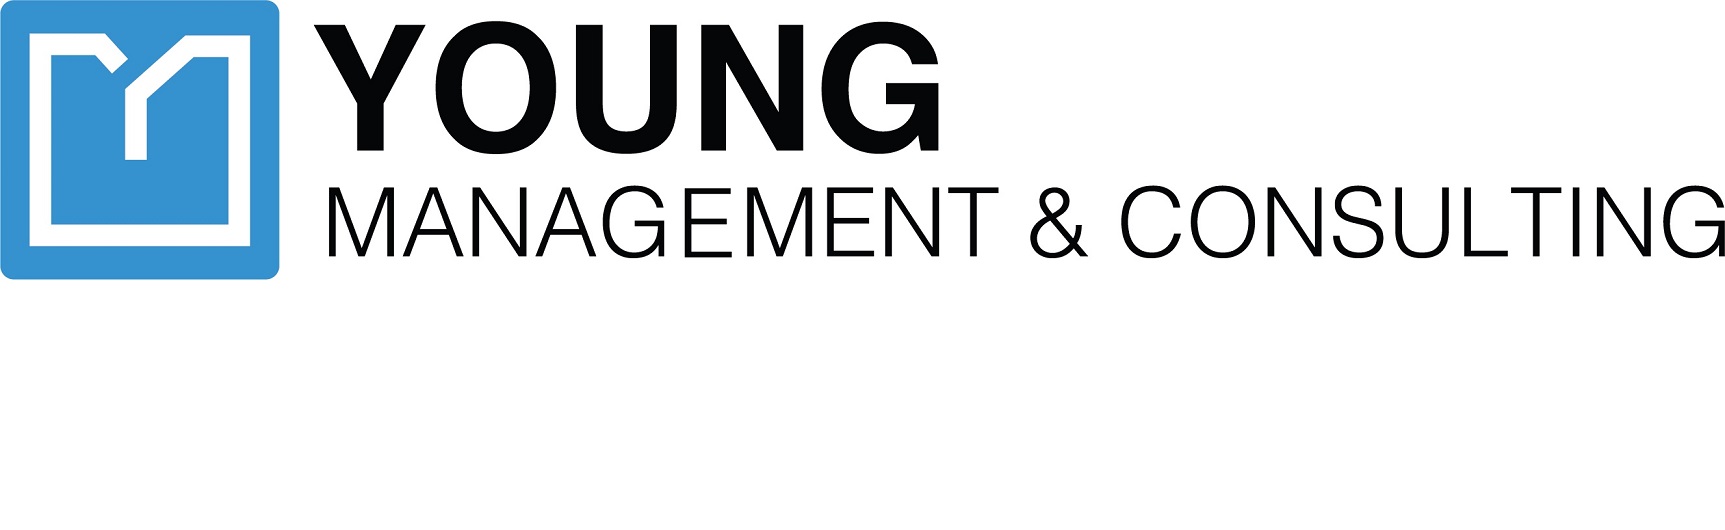 Young Management & Consulting